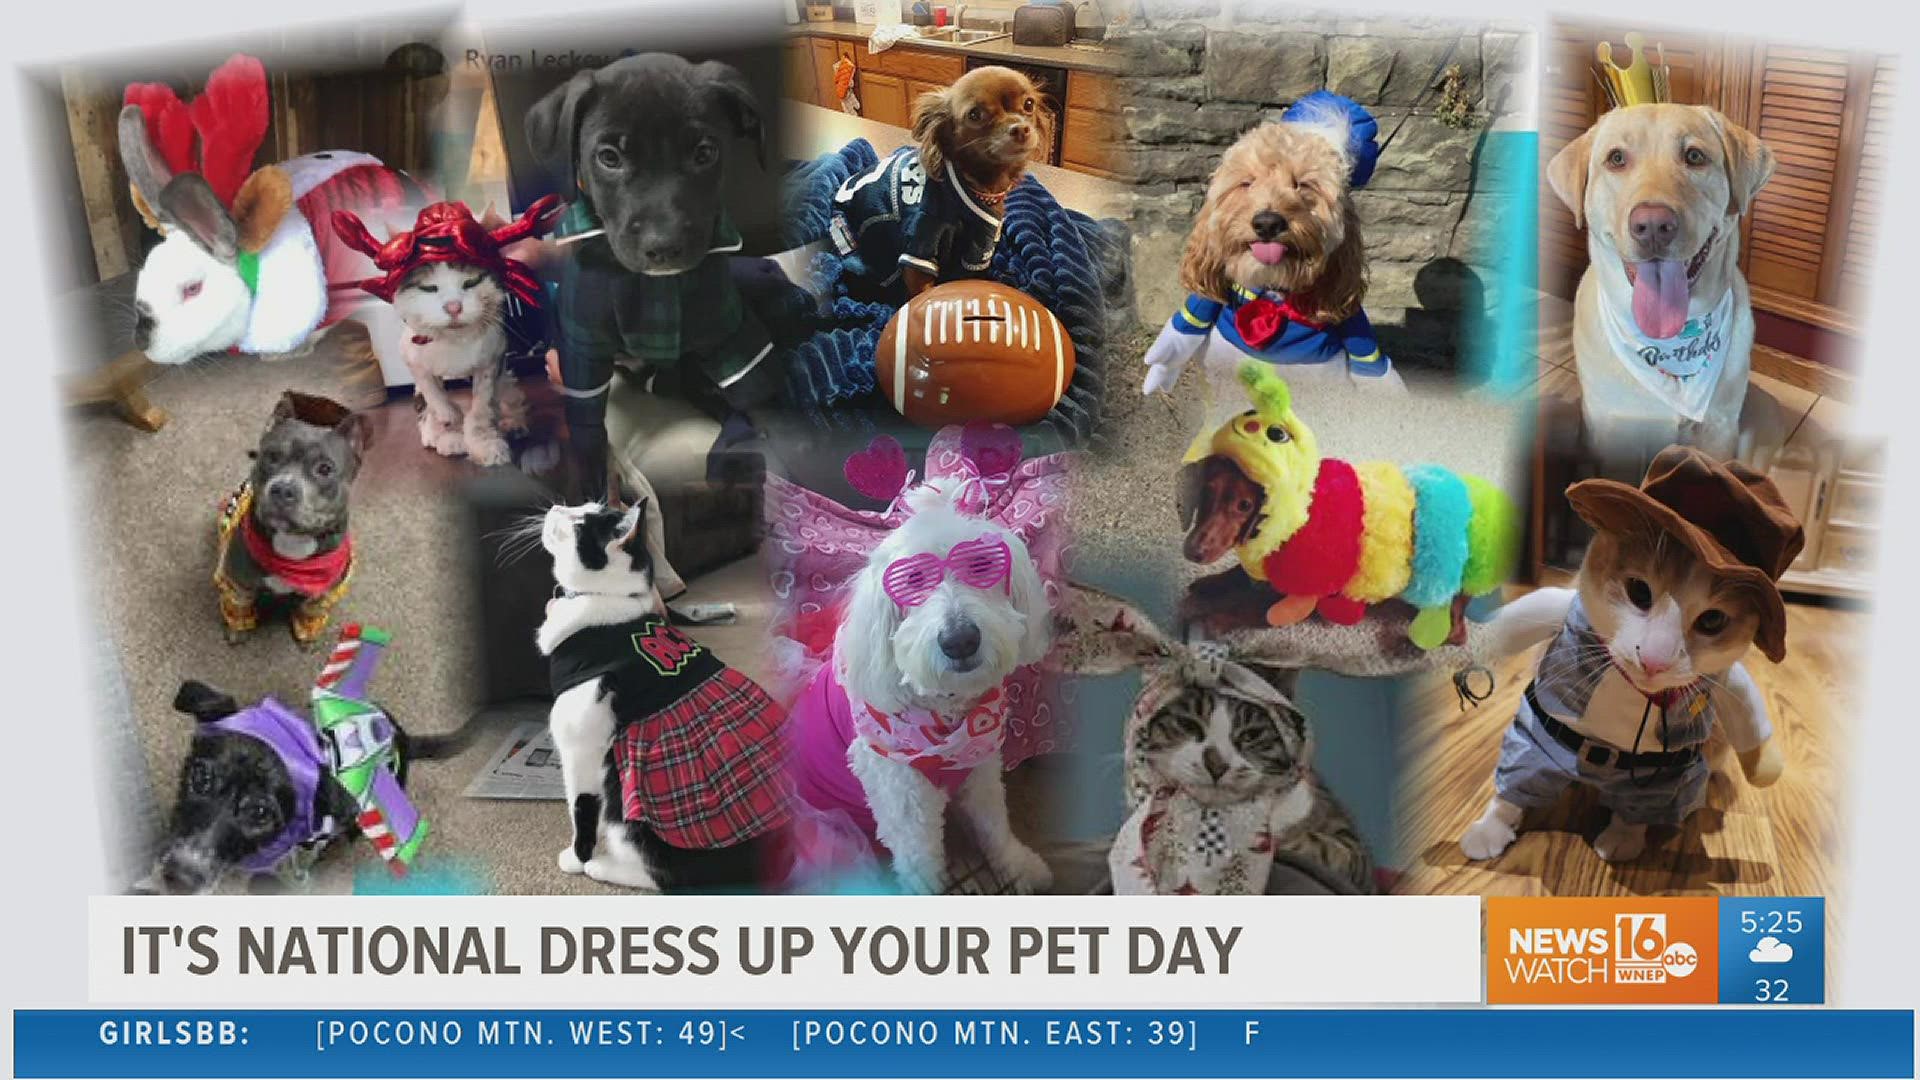 Whether it’s a cool costume or just a fancy, fun sweater, it’s the "purrfect" Friday to deck out your furball. After all, it’s National Dress Up Your Pet Day.